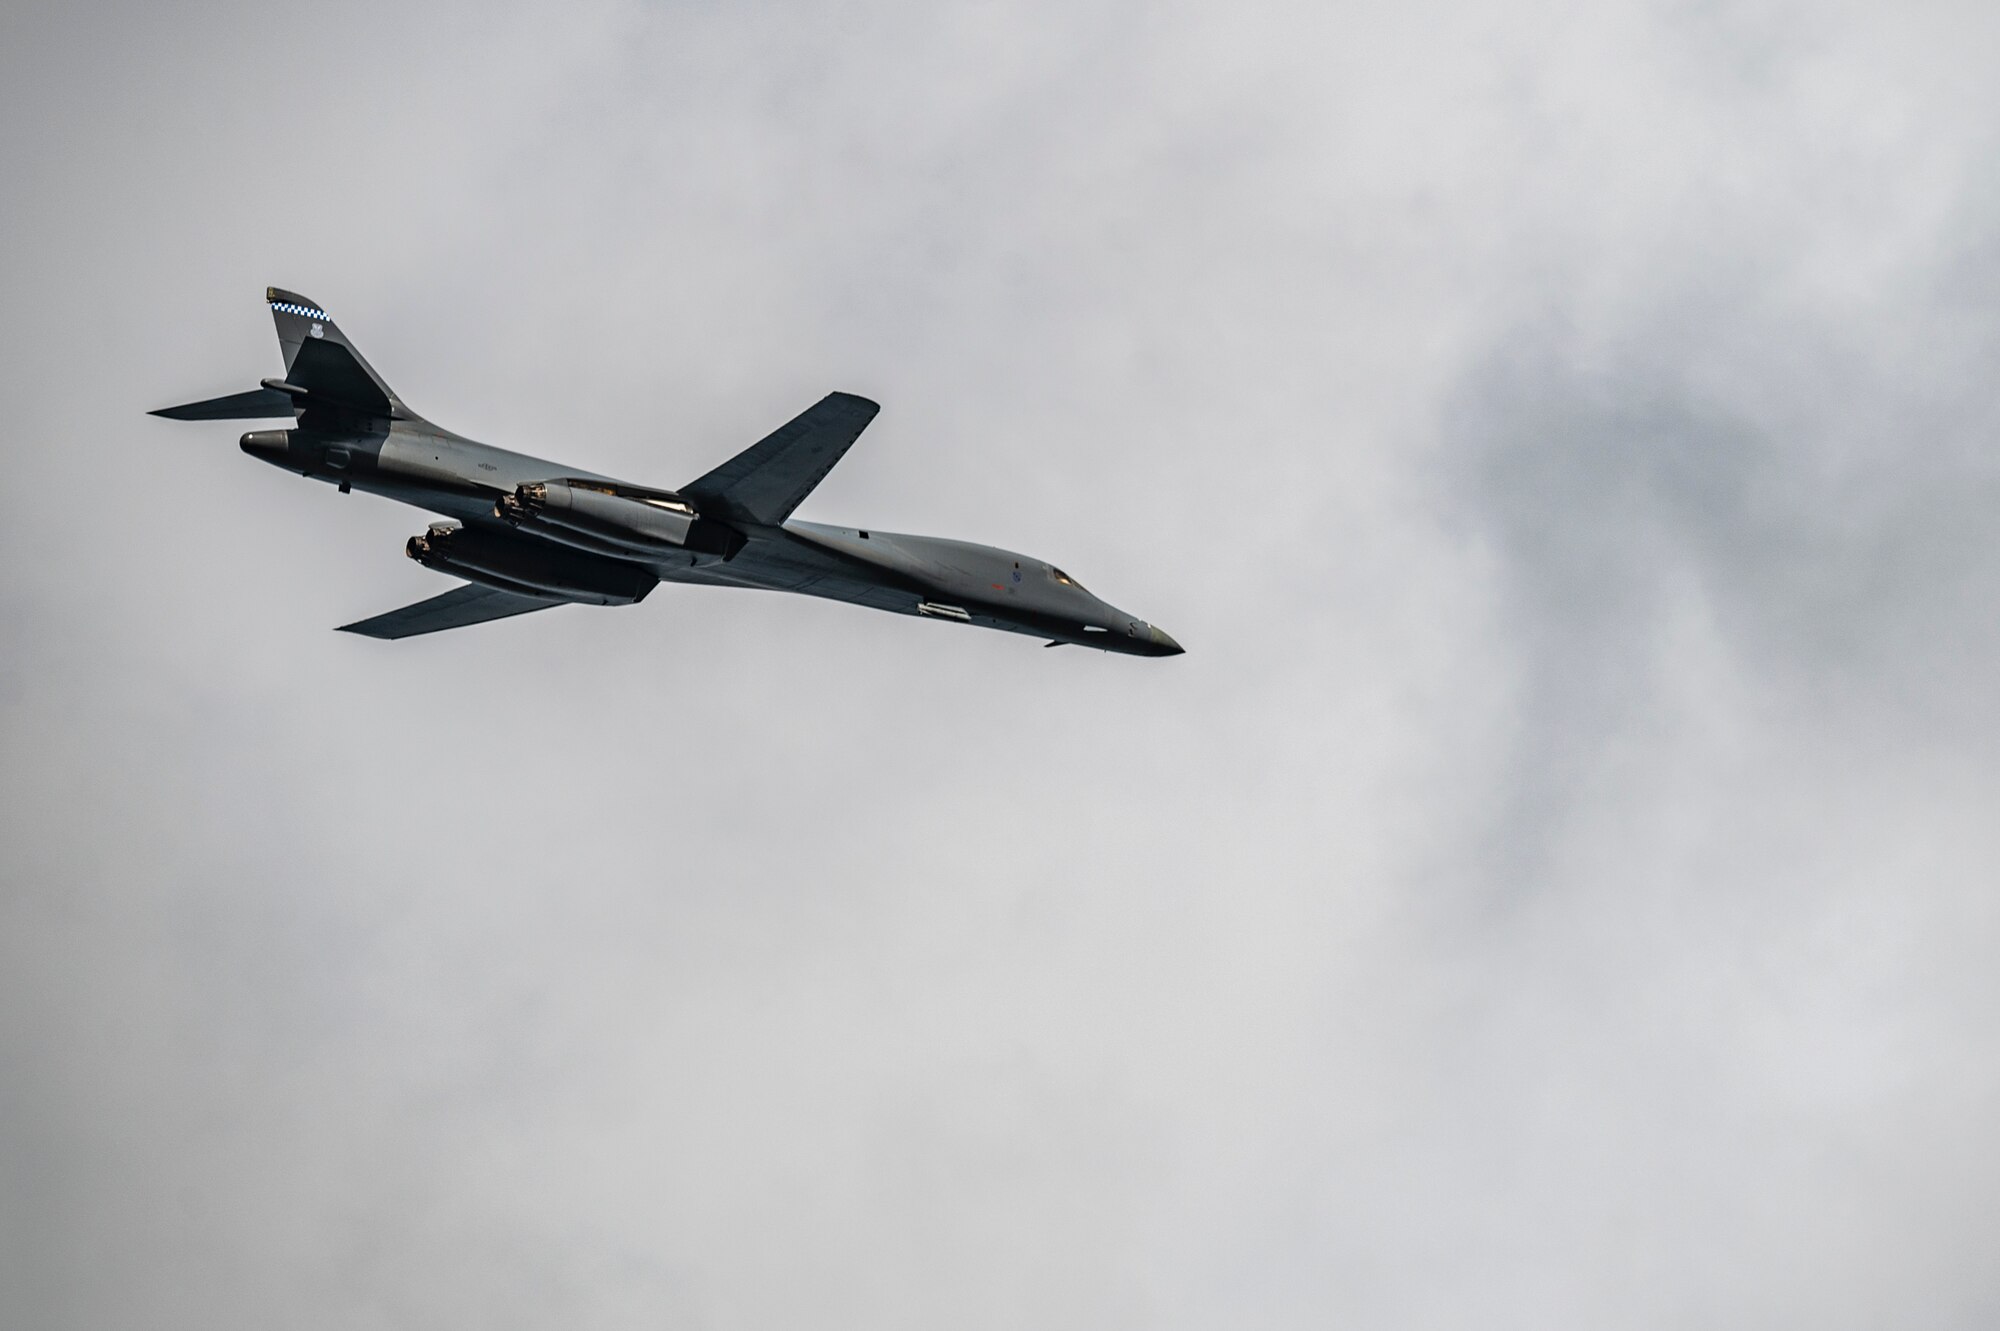 A B-1B Lancers assigned to the 9th Expeditionary Bomb Squadron flies over RAF Fairford, United Kingdom, Oct. 24, 2023. U.S. Strategic Command Bomber Task Force missions provide opportunities to train and work with our Allies and partners in joint and combined operations and exercises. (U.S. Air Force Photo by Senior Airman Ryan Hayman)